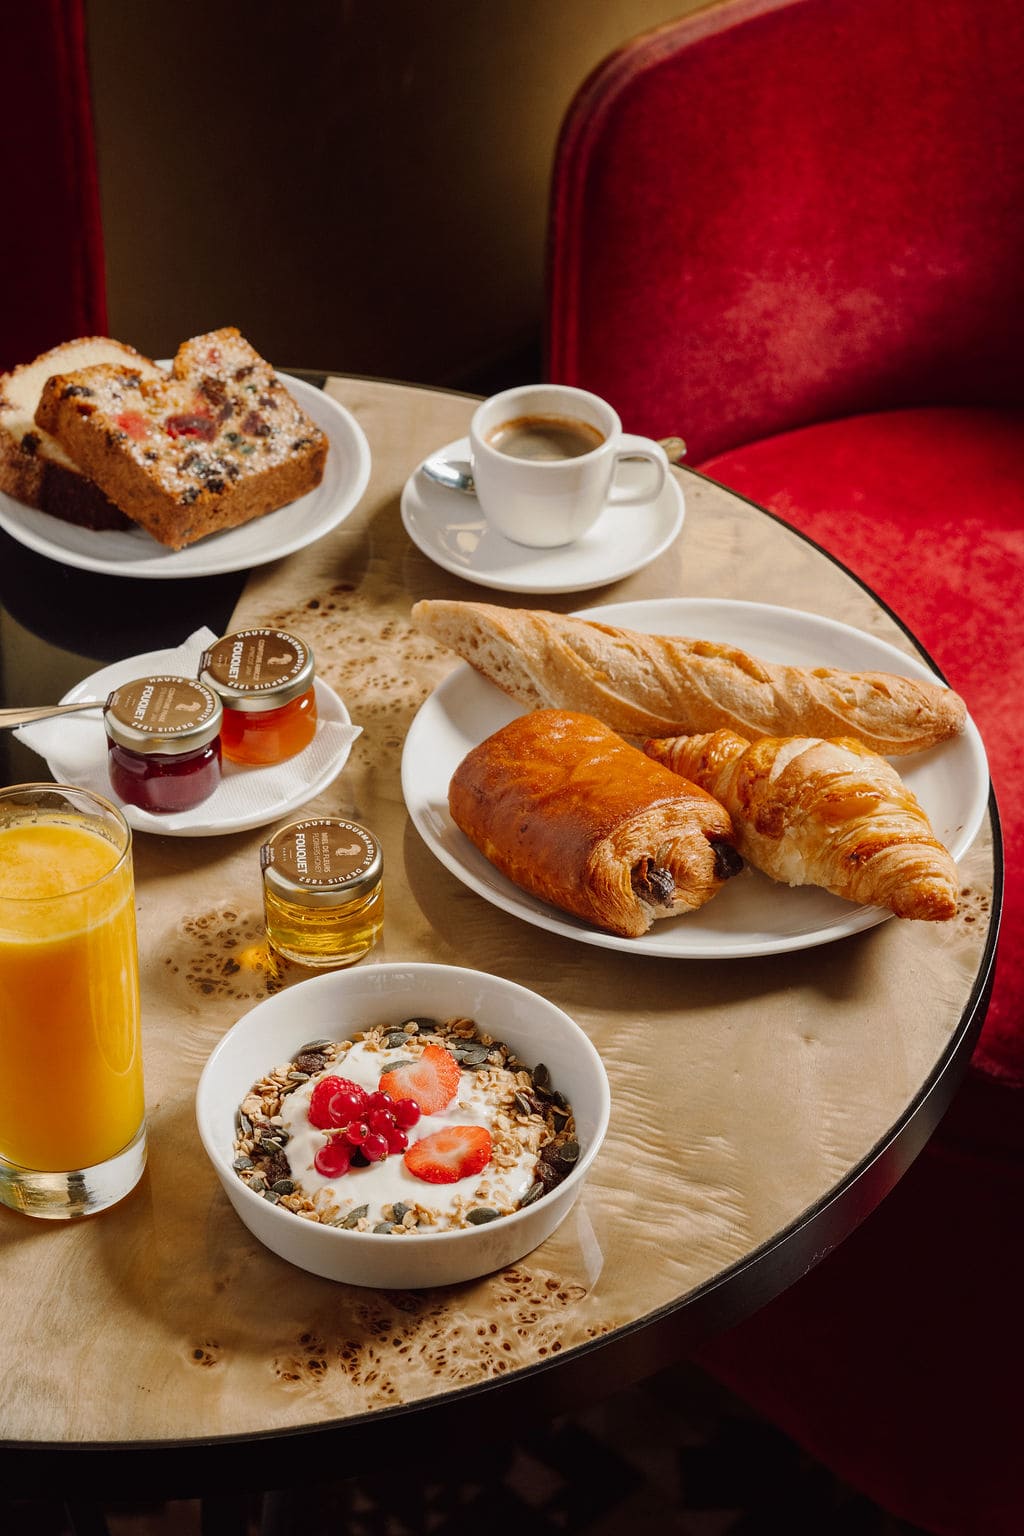 Brunch and breakfast selection from the Café Français, with pastries, jams, cakes, breads and fresh fruit juices.